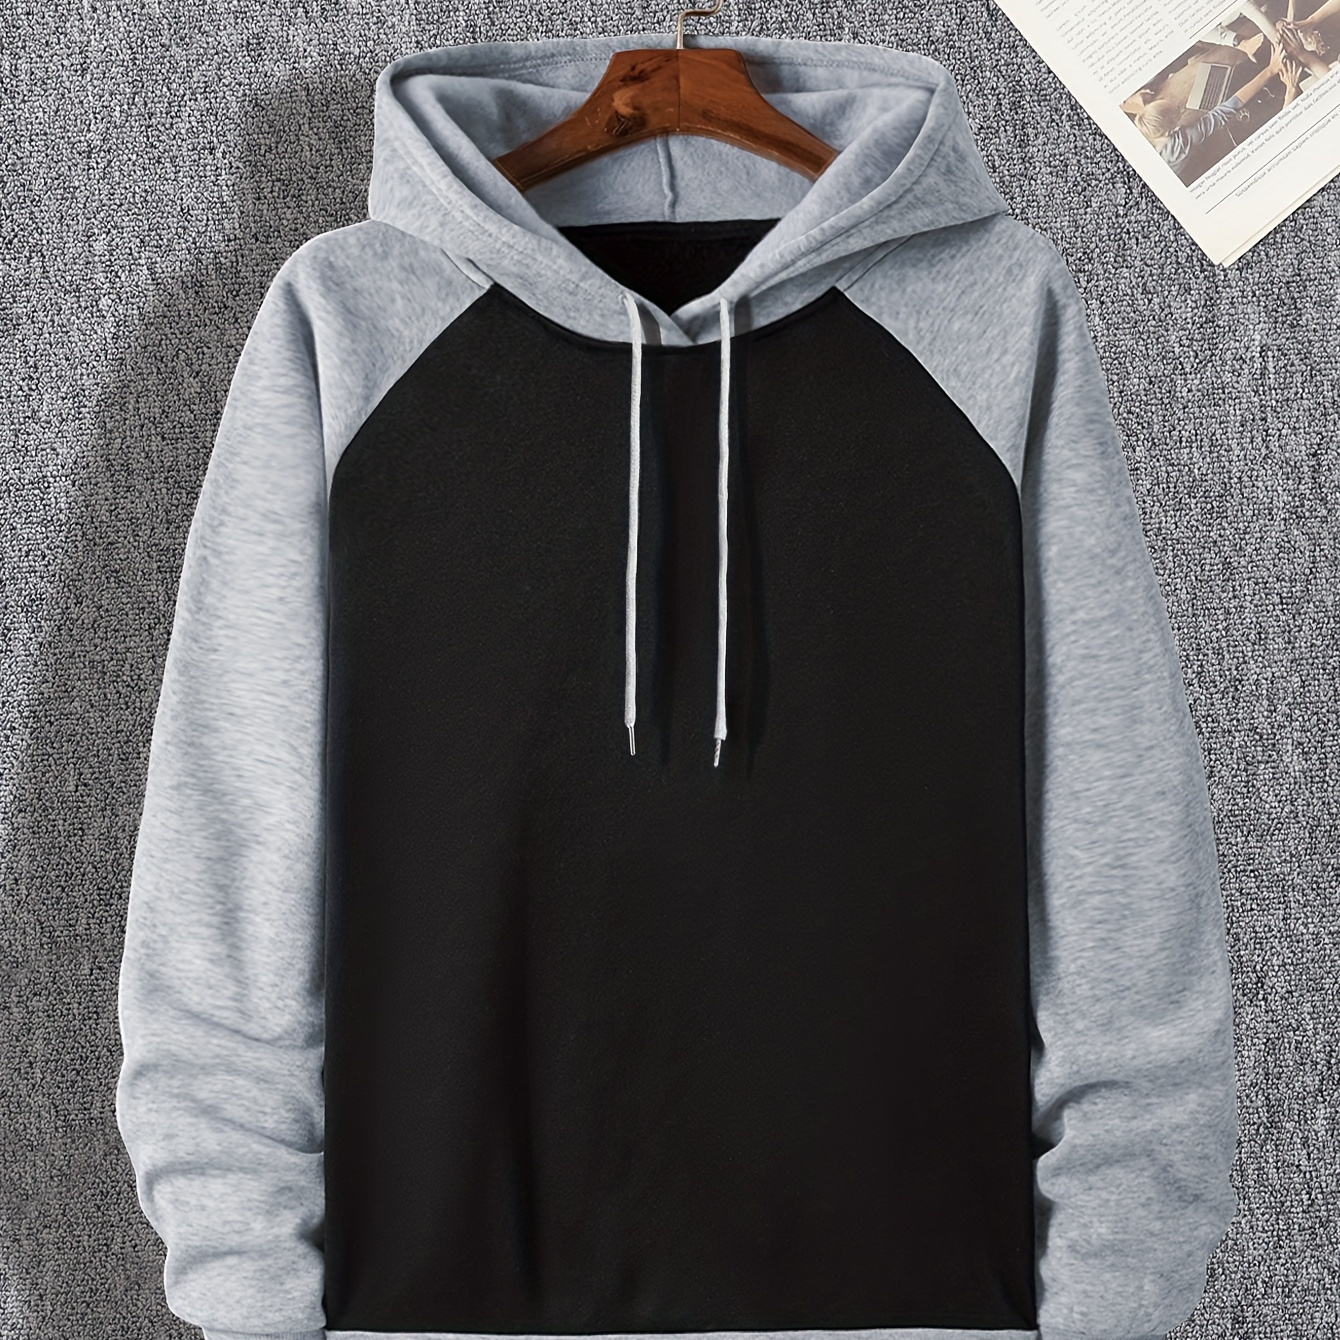 

Plus Size Men's Hoodie, Comfy Stretch Drawstring Trendy Hooded Pullover, Oversized Loose Sweatshirts